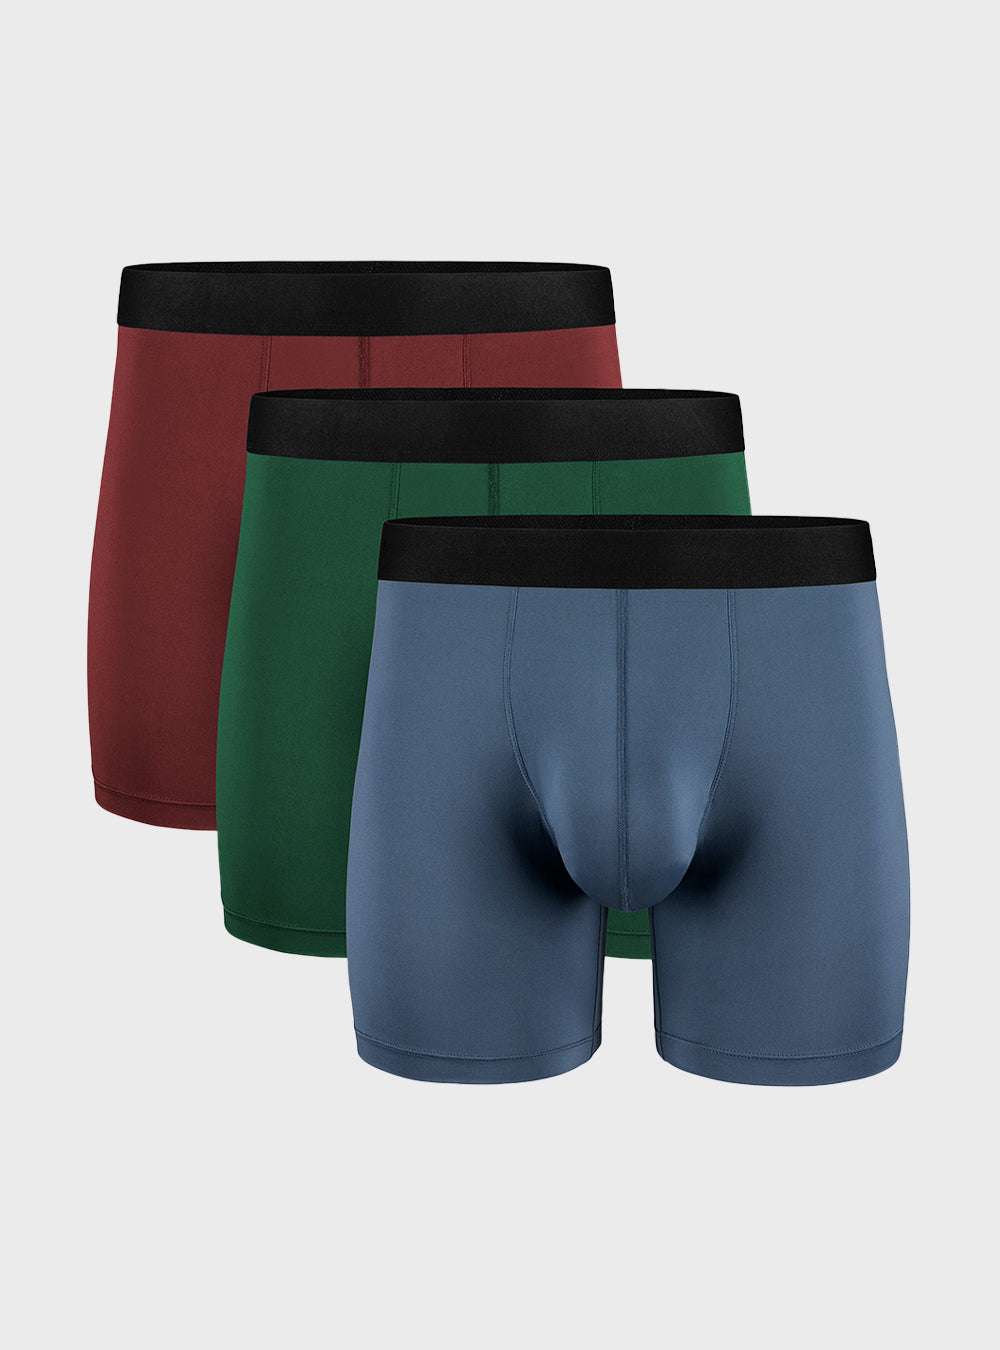 Highly Elastic Breathable Sports Boxer Briefs 3 Pack